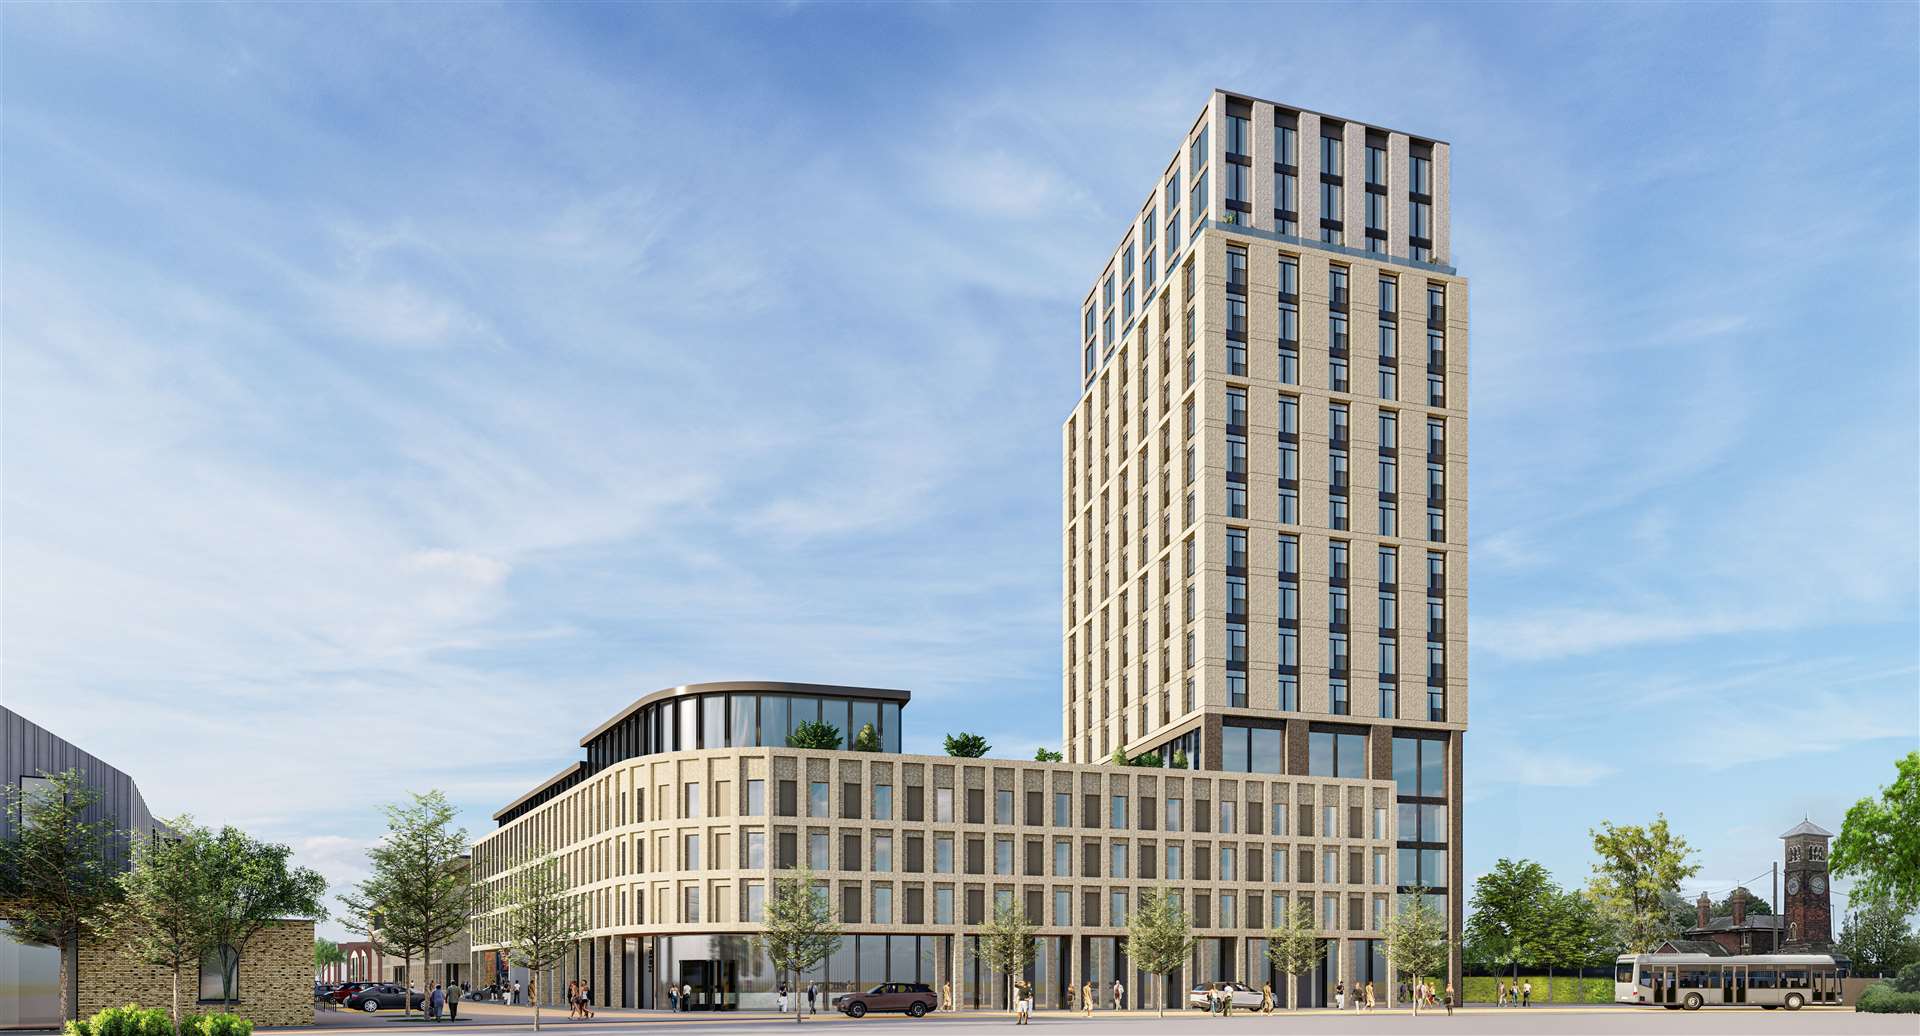 Developers say the 18-storey hotel will be the tallest building in Ashford, providing “visual interest and high architectural quality” and a “landmark” for the town. It will feature 120 bedrooms, 62 serviced apartments, a conference centre, restaurant and leisure function space. The 120 hotel rooms will be provided on floors one to three. A restaurant and leisure facilities/function space will be provided on the fourth floor. The 62 serviced apartments will be built on floors five to 17 with five units per floor. There will be 10 one-bedroom units and 52 two-bed flats